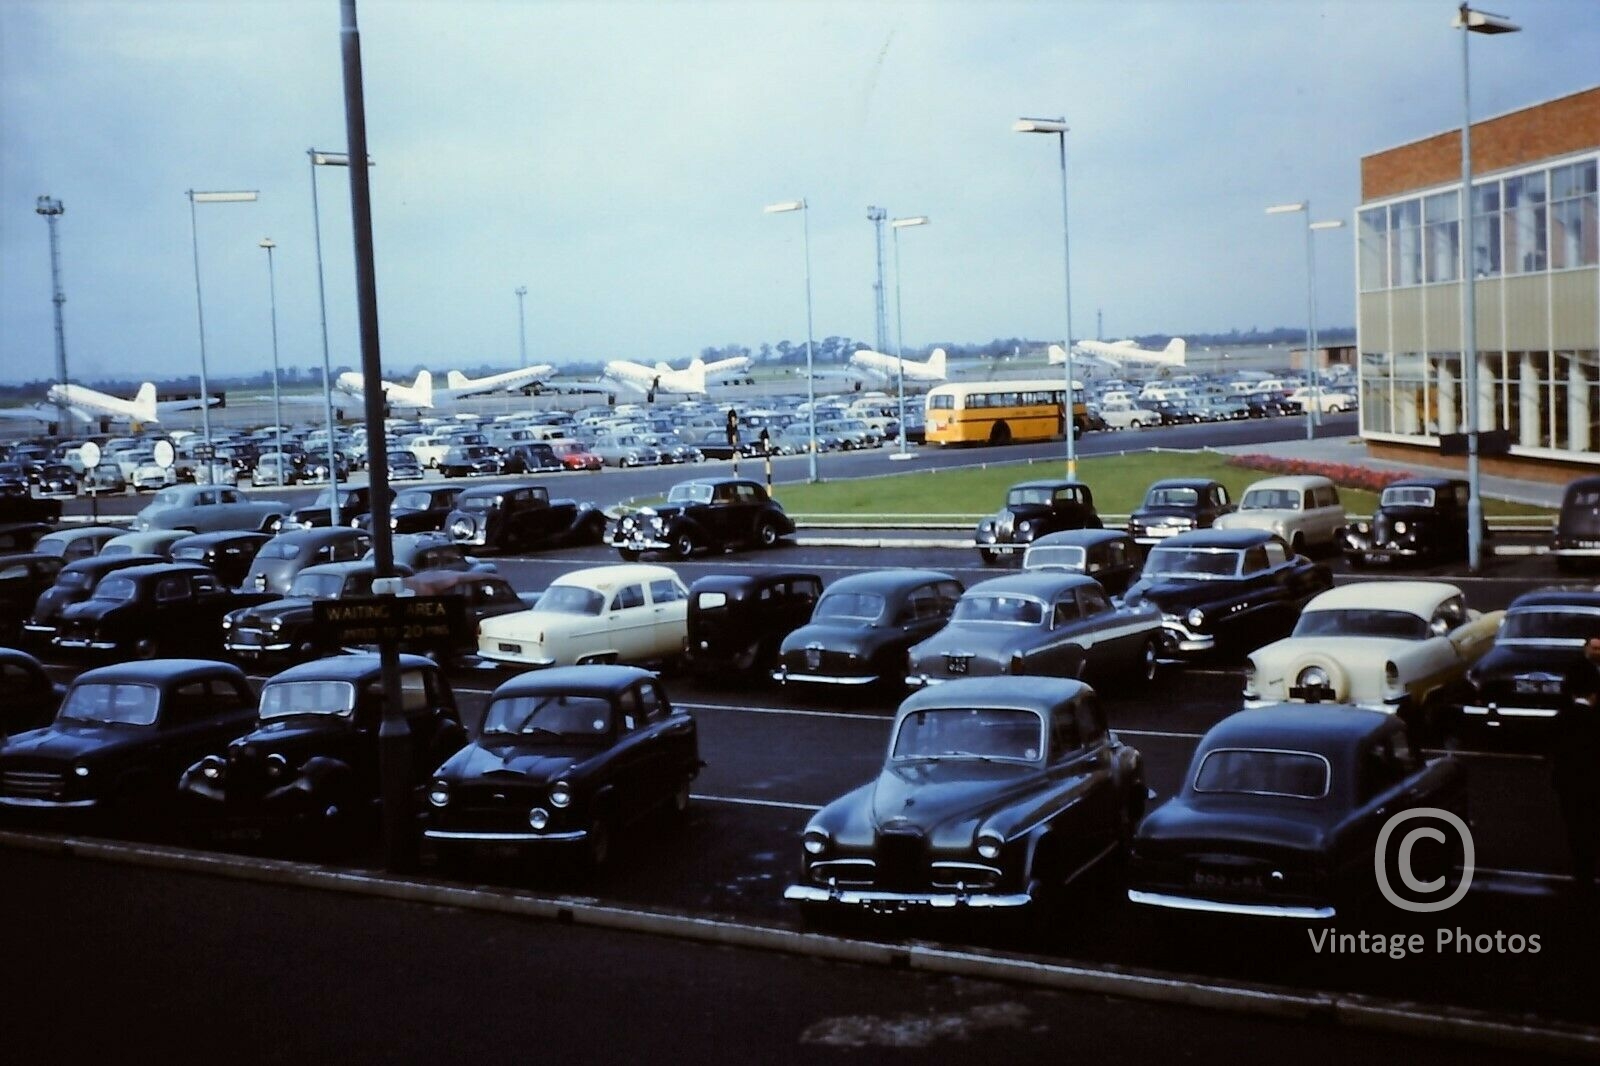 1950s United Kingdom Airport - Many Cars Parked